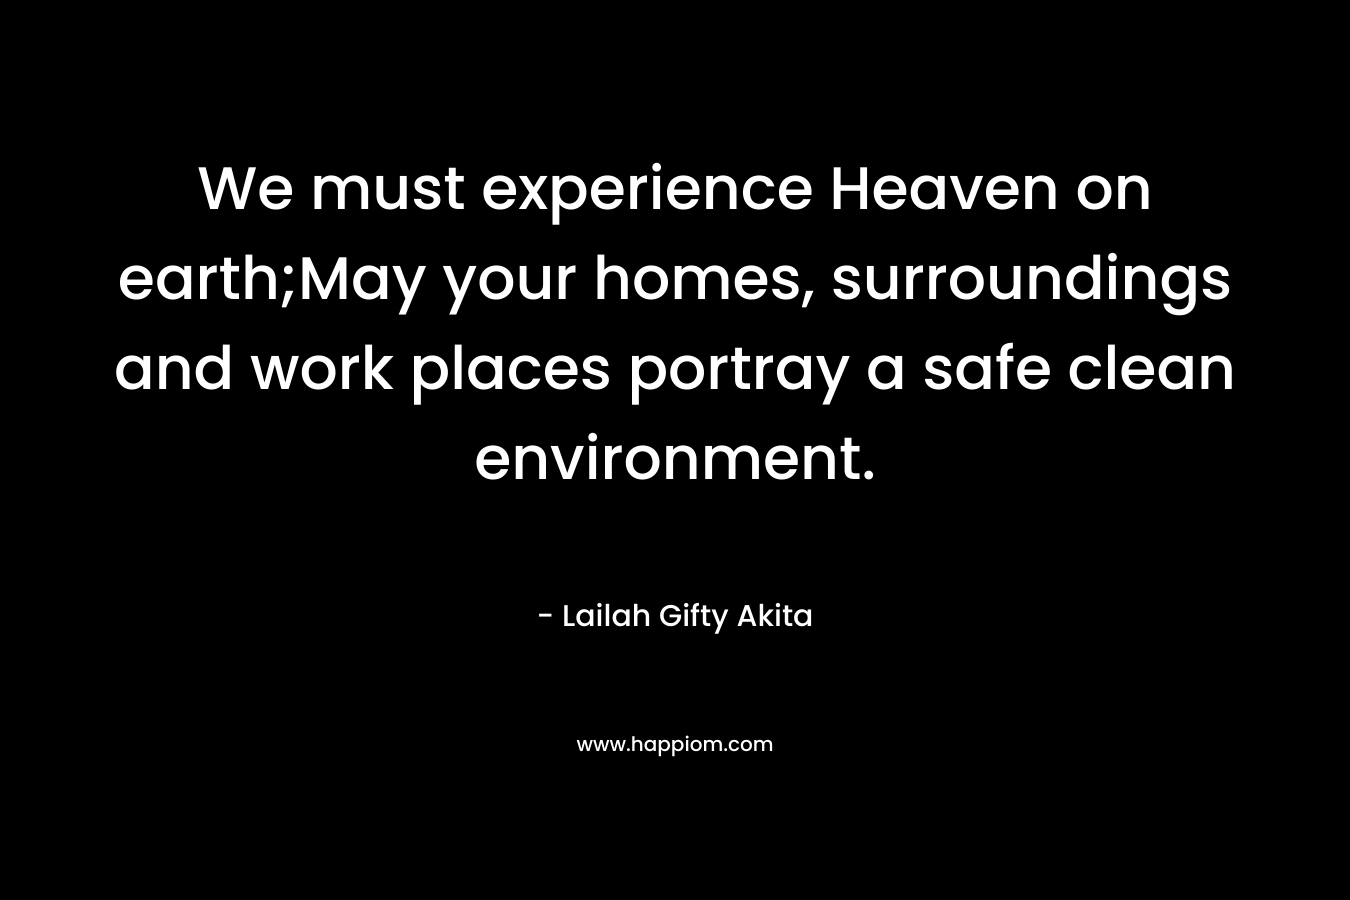 We must experience Heaven on earth;May your homes, surroundings and work places portray a safe clean environment. – Lailah Gifty Akita